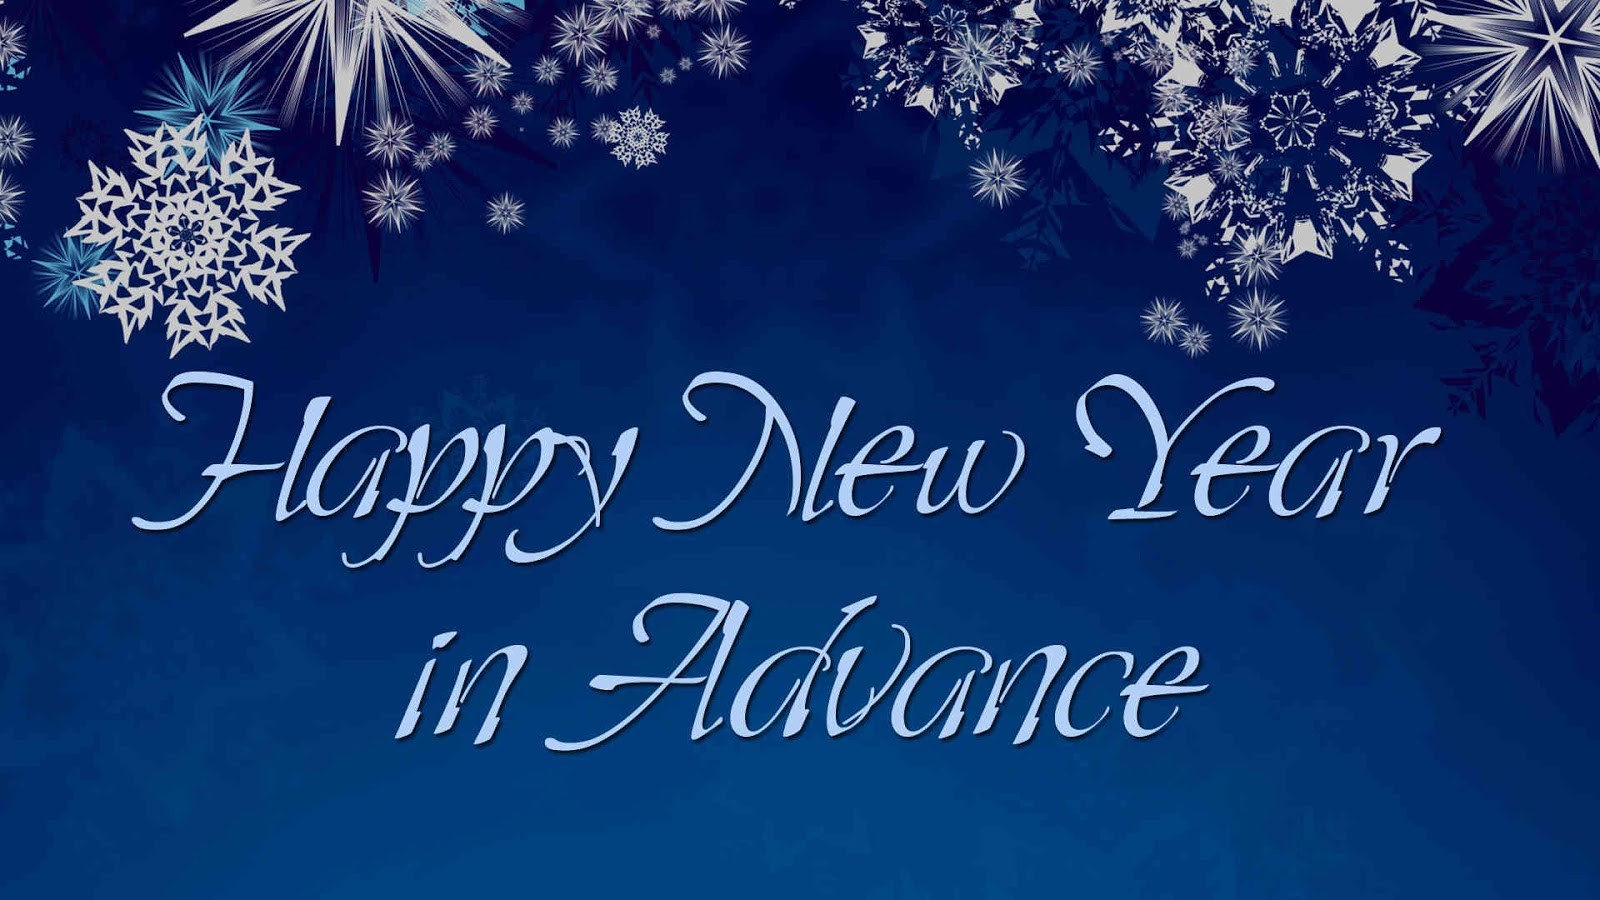 Advance Happy New Year 2023 Images best collections free download